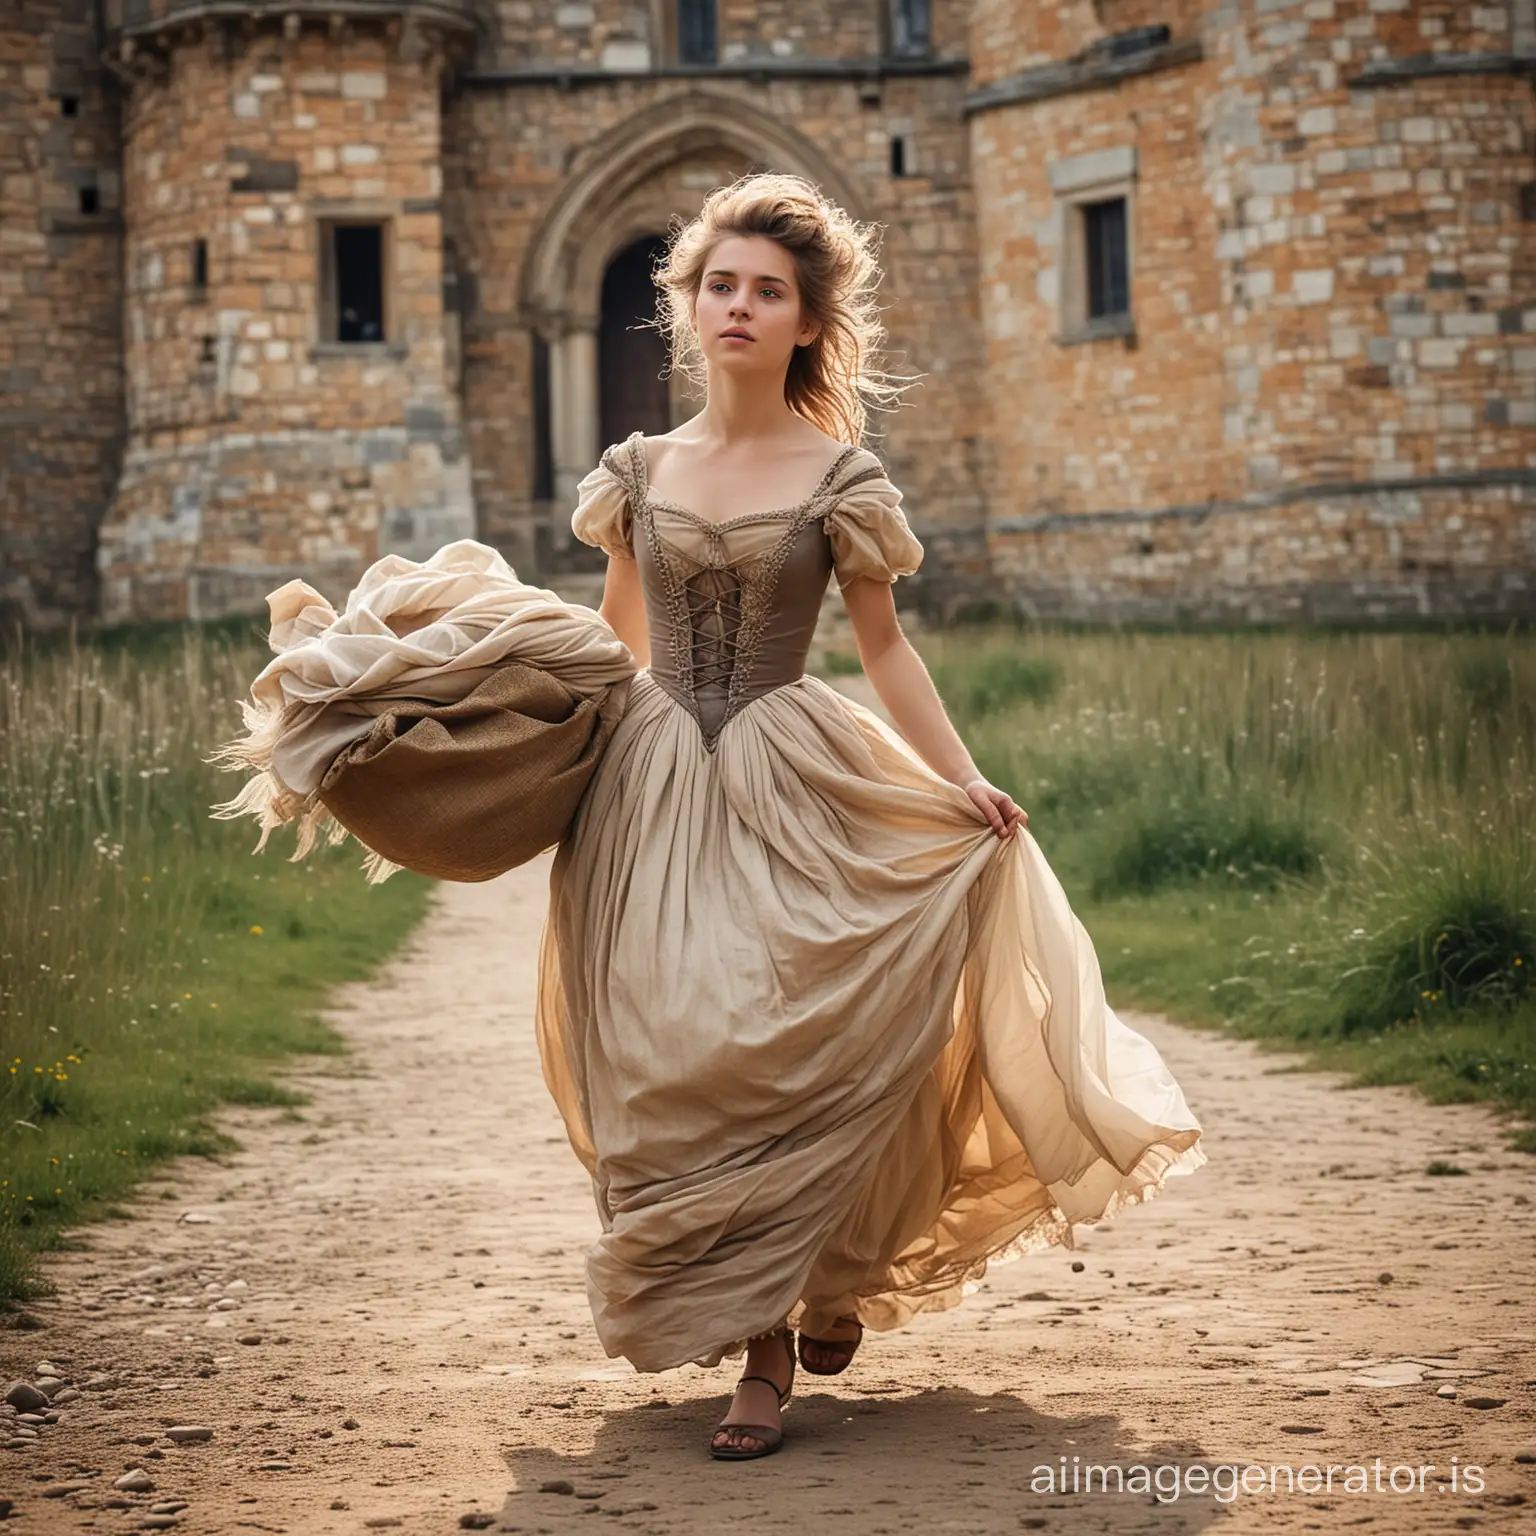 sixteen year old wearing fancy ball gown dress dirty skin messy hair running from a castle.holding sack. 19th century europe.